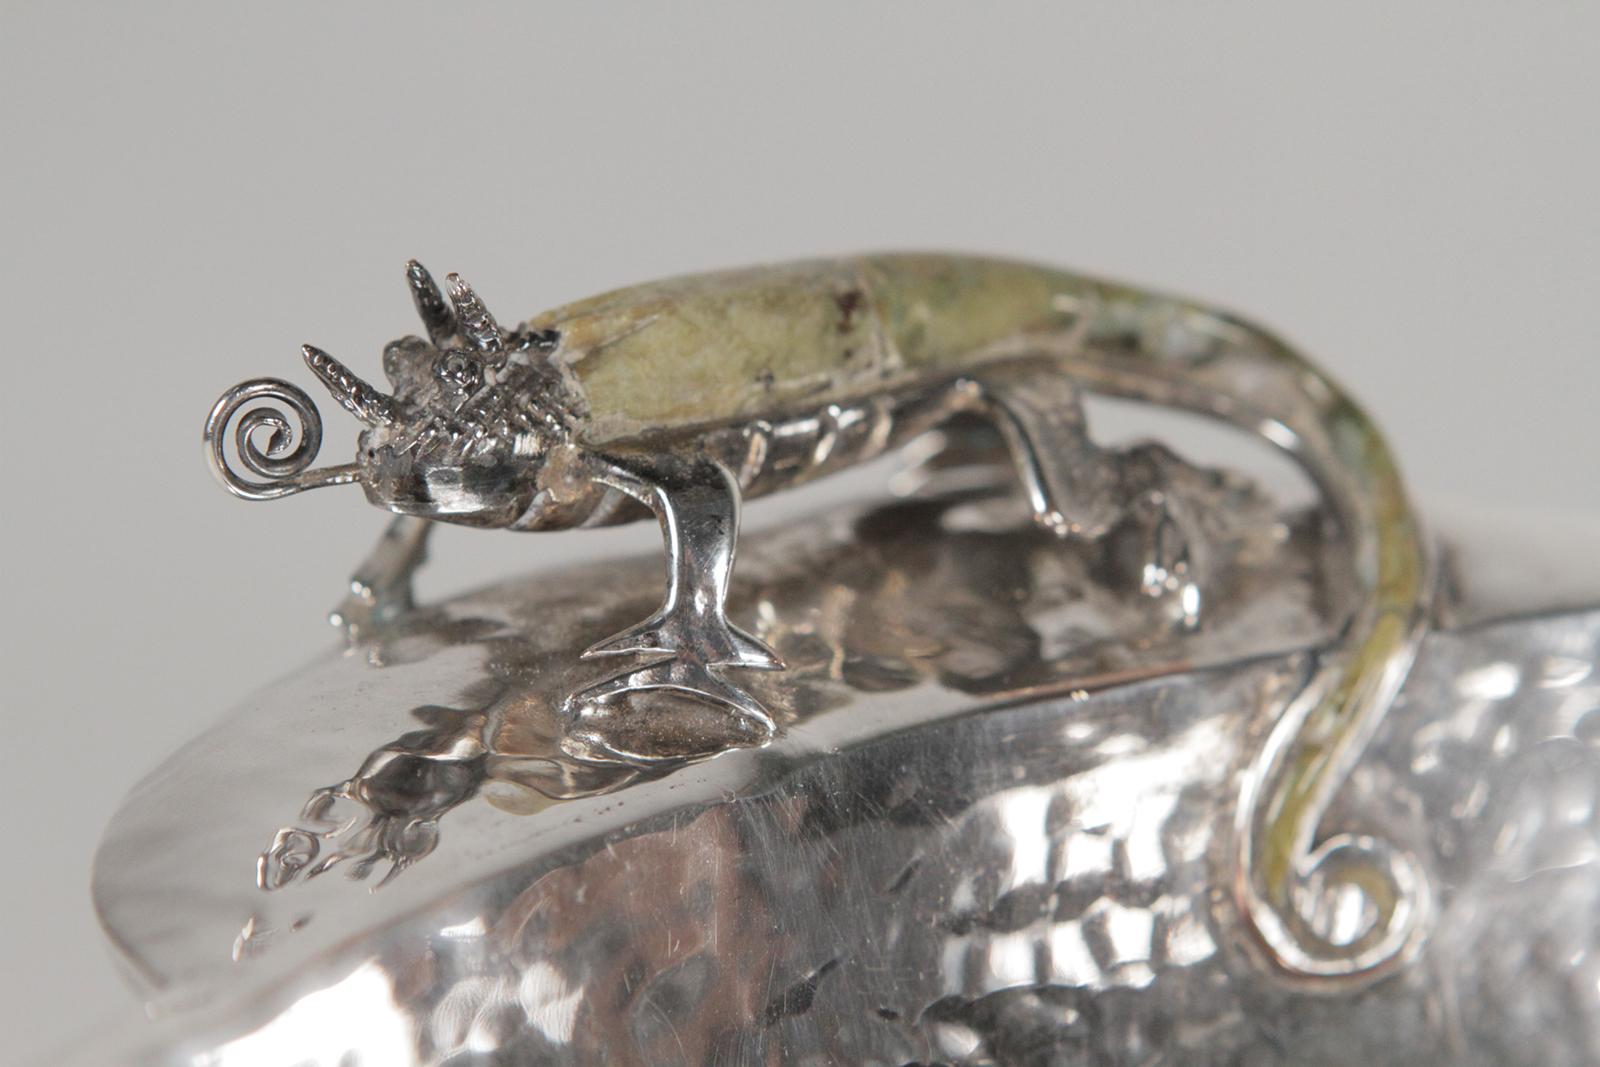 Los Castillo hand-hammered silver plated lizard bowl, 1960s. Handles have handcrafted lizard inlaid with green stone with horns and curling tongue. This is the rare larger size. 
The Castillo school was started by the Castillo brothers in 1939